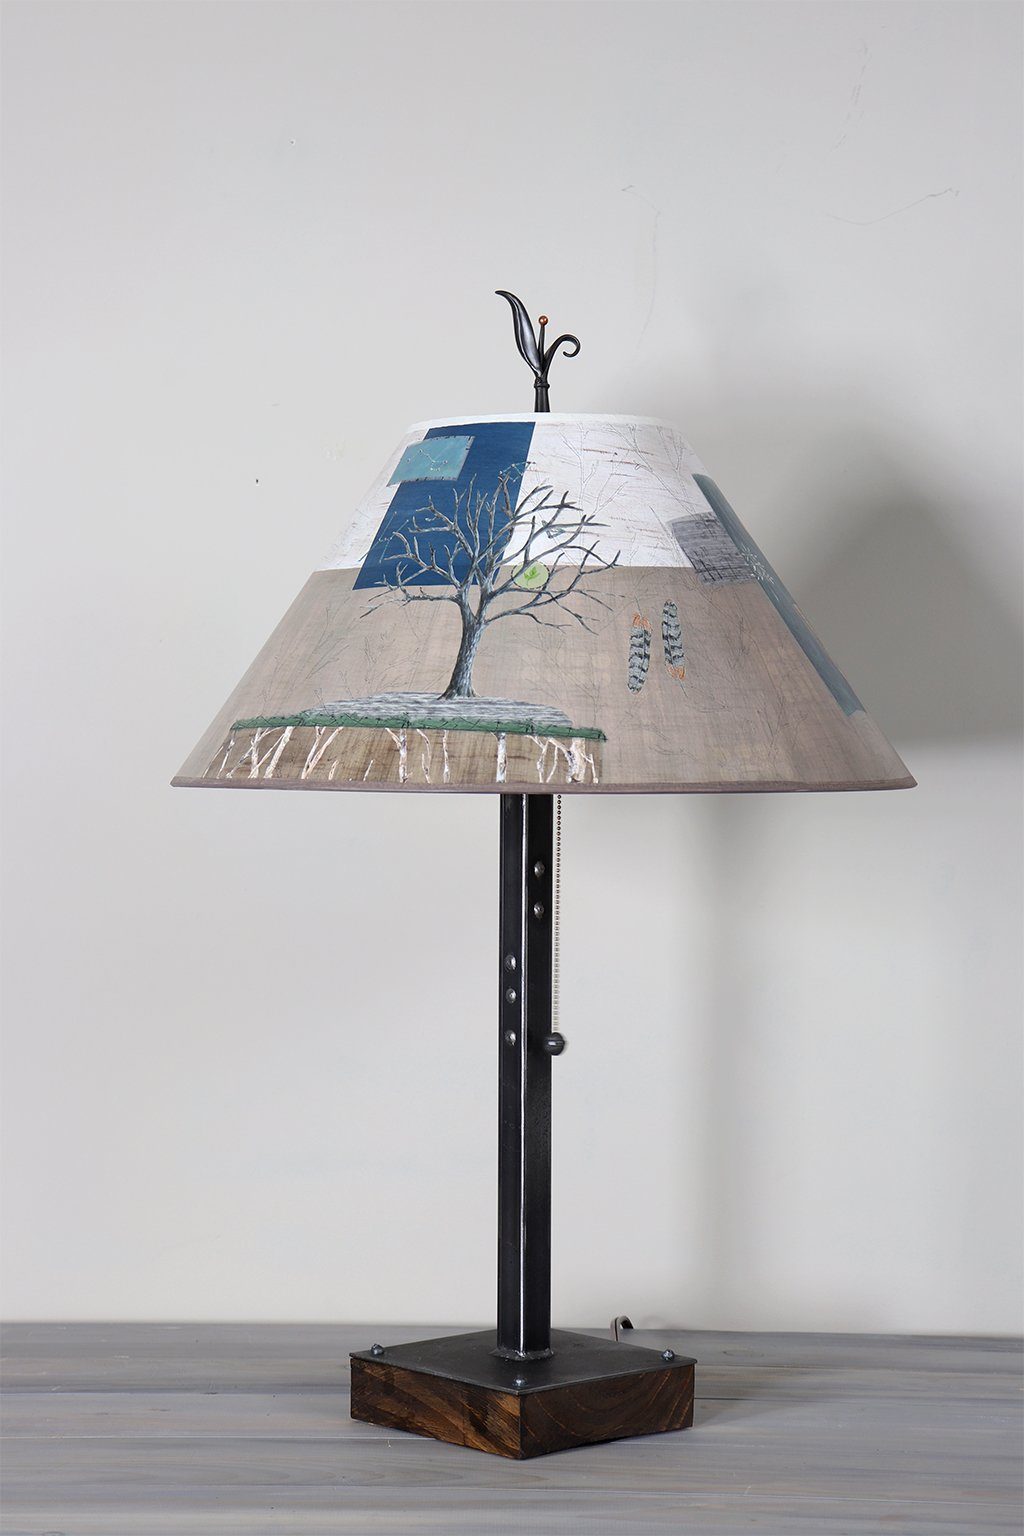 Steel Table Lamp on Wood with Large Conical Shade in Wander in Drift